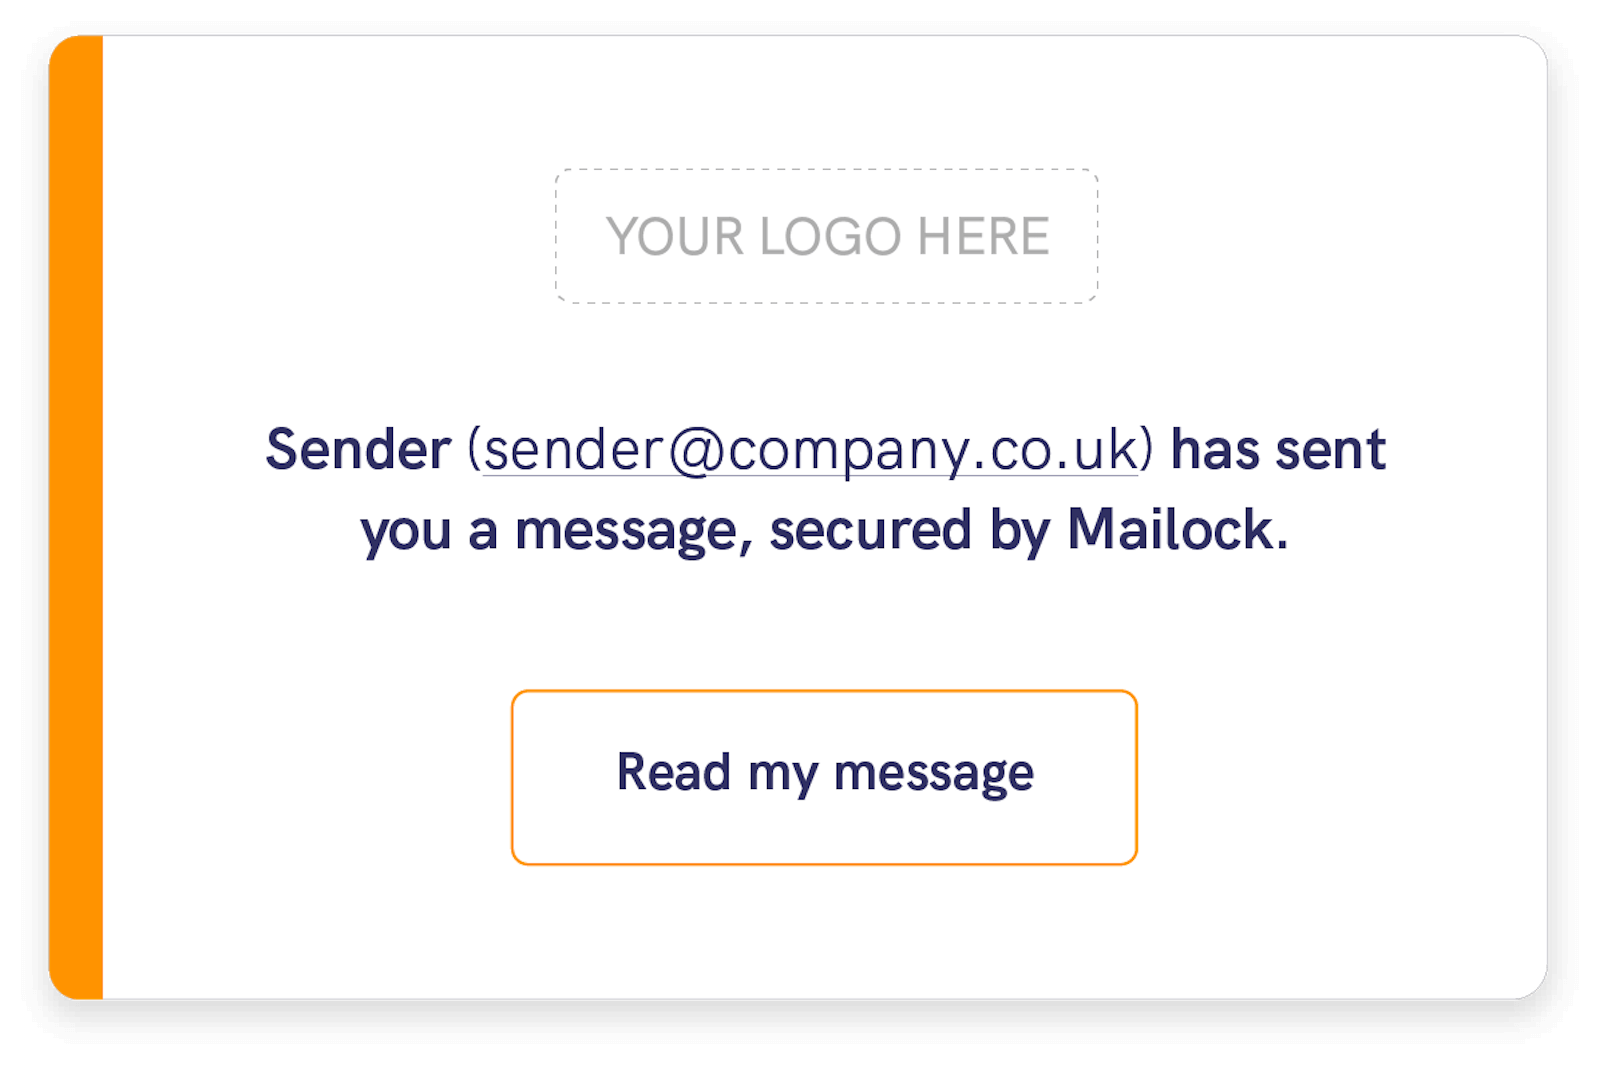 Branding on secure emails